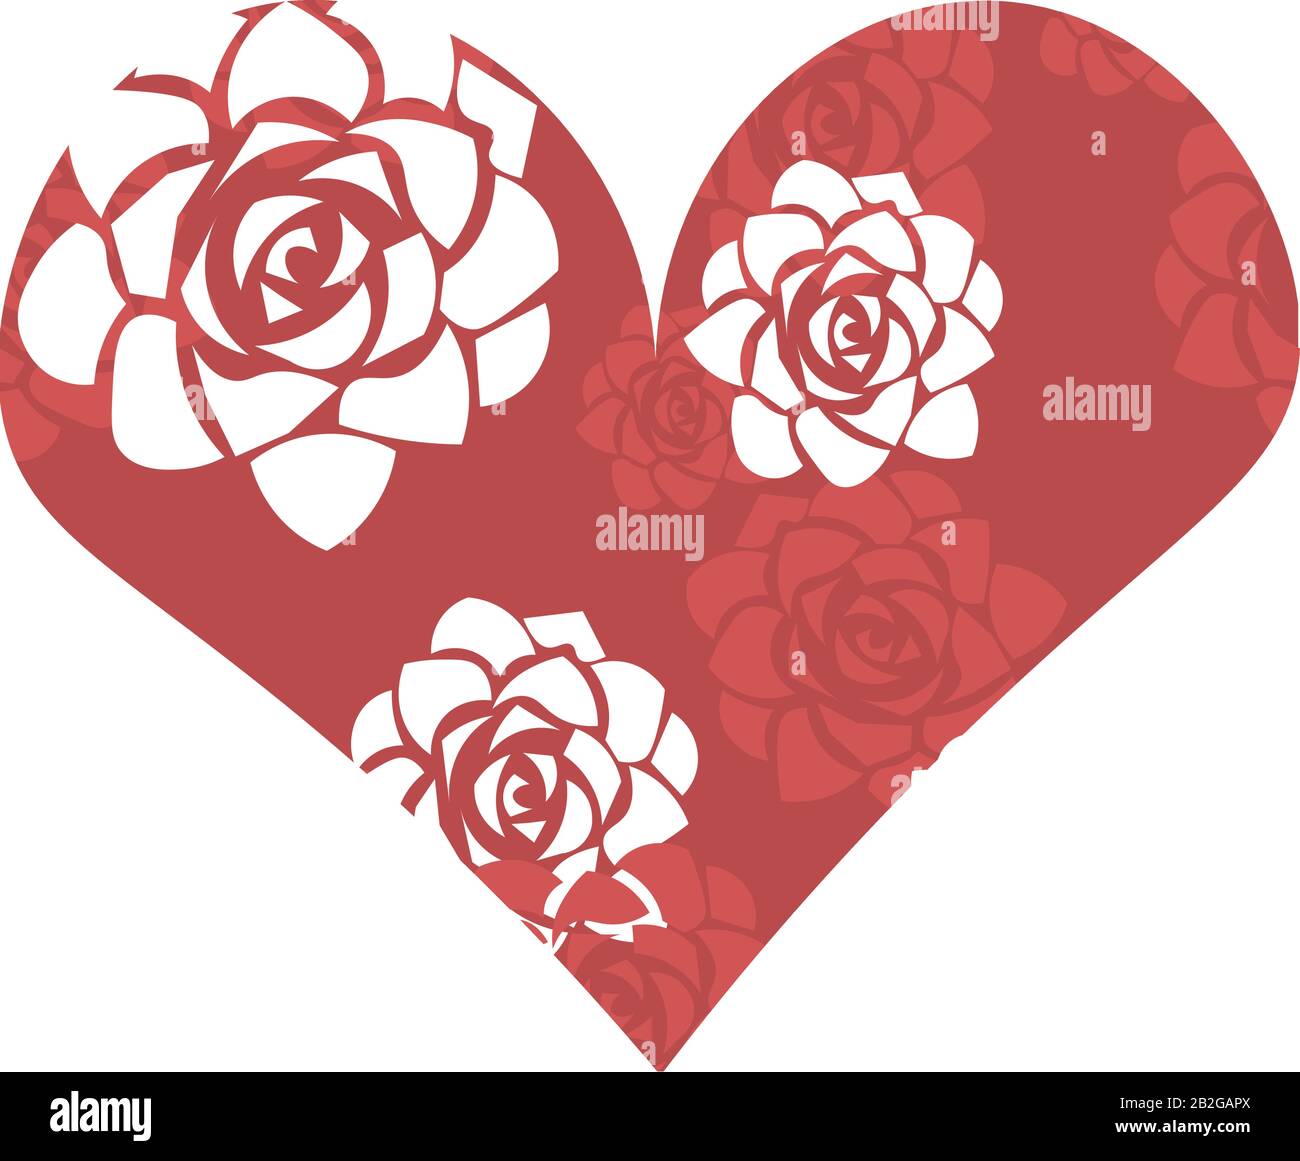 Heart of roses. Delicate design for cards, flyers, decorations. Valentine's Day. Love and romance. Stock Vector